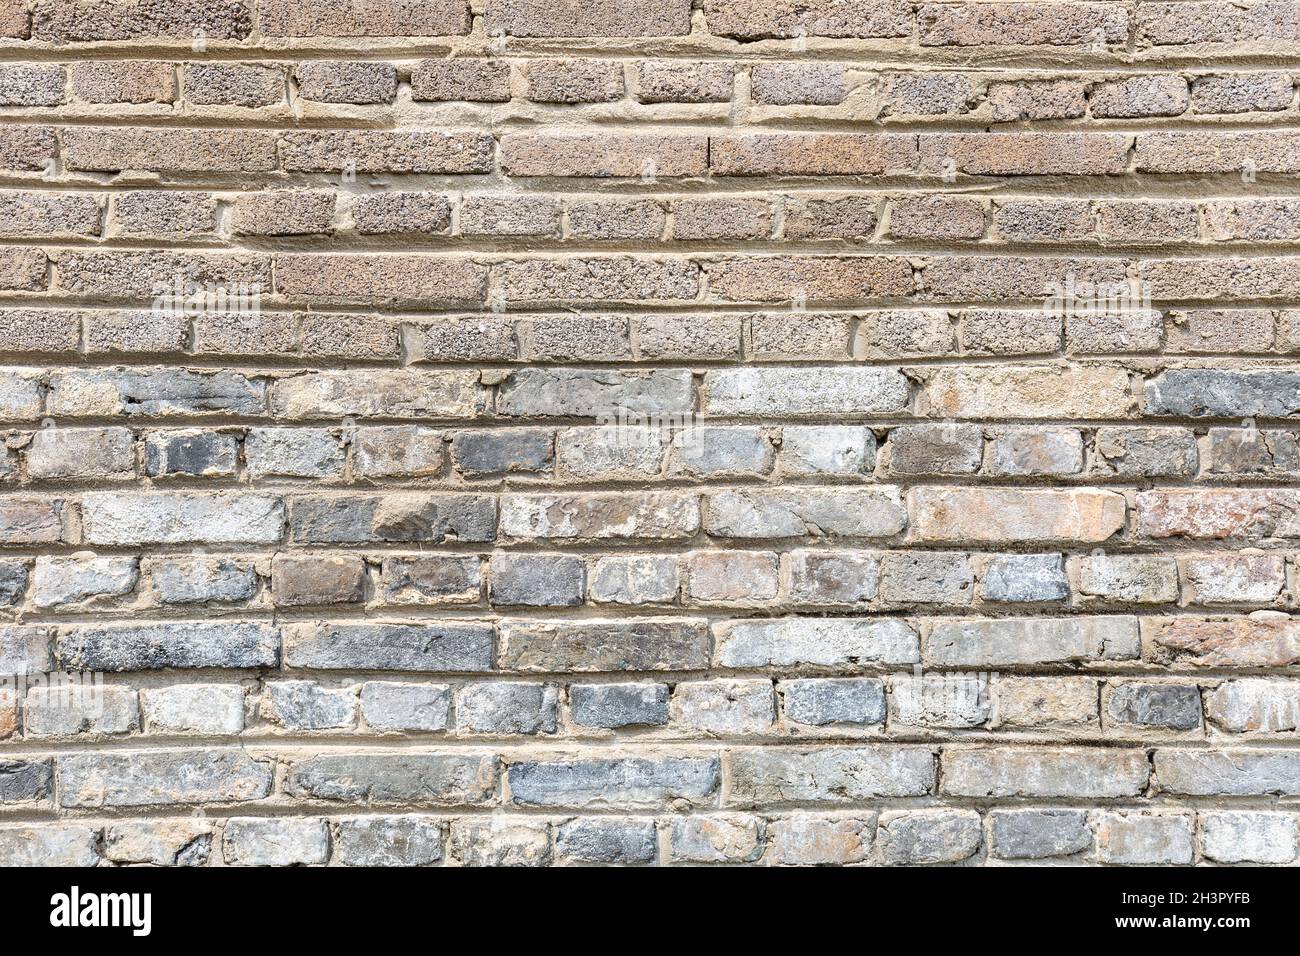 Old brick wall background Banque D'Images